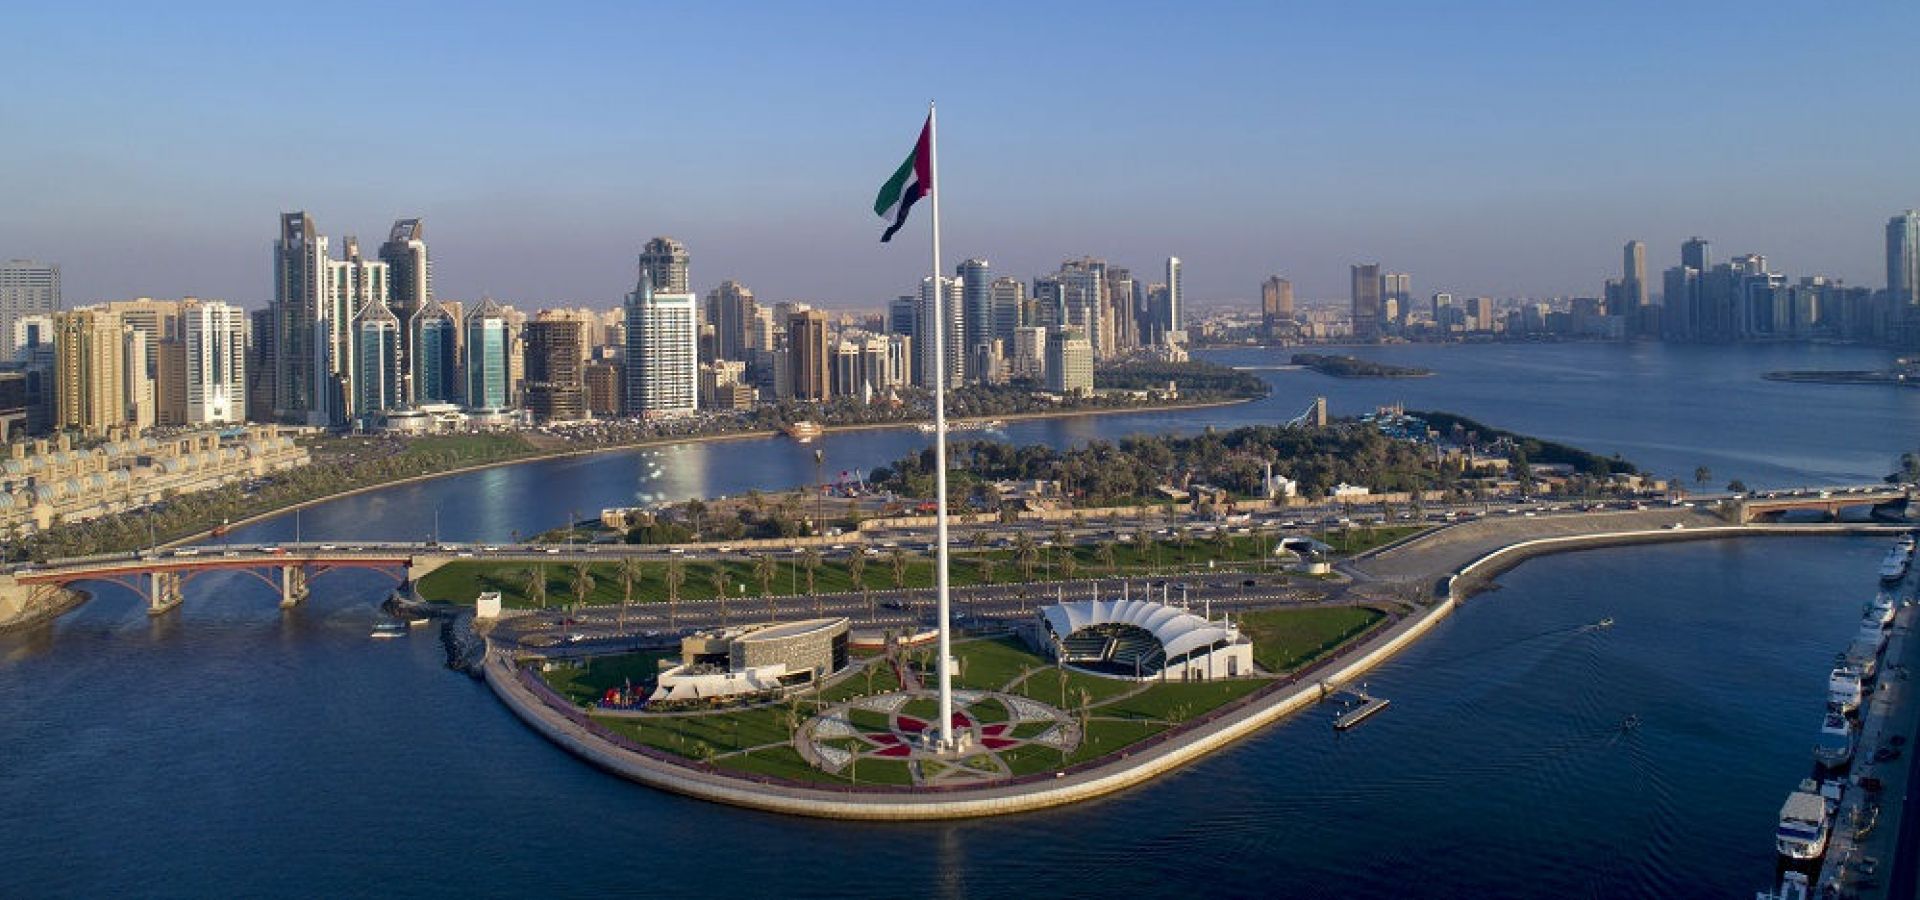 Sharjah: New Regulations to Fight the COVID-19 - Coming Soon in UAE